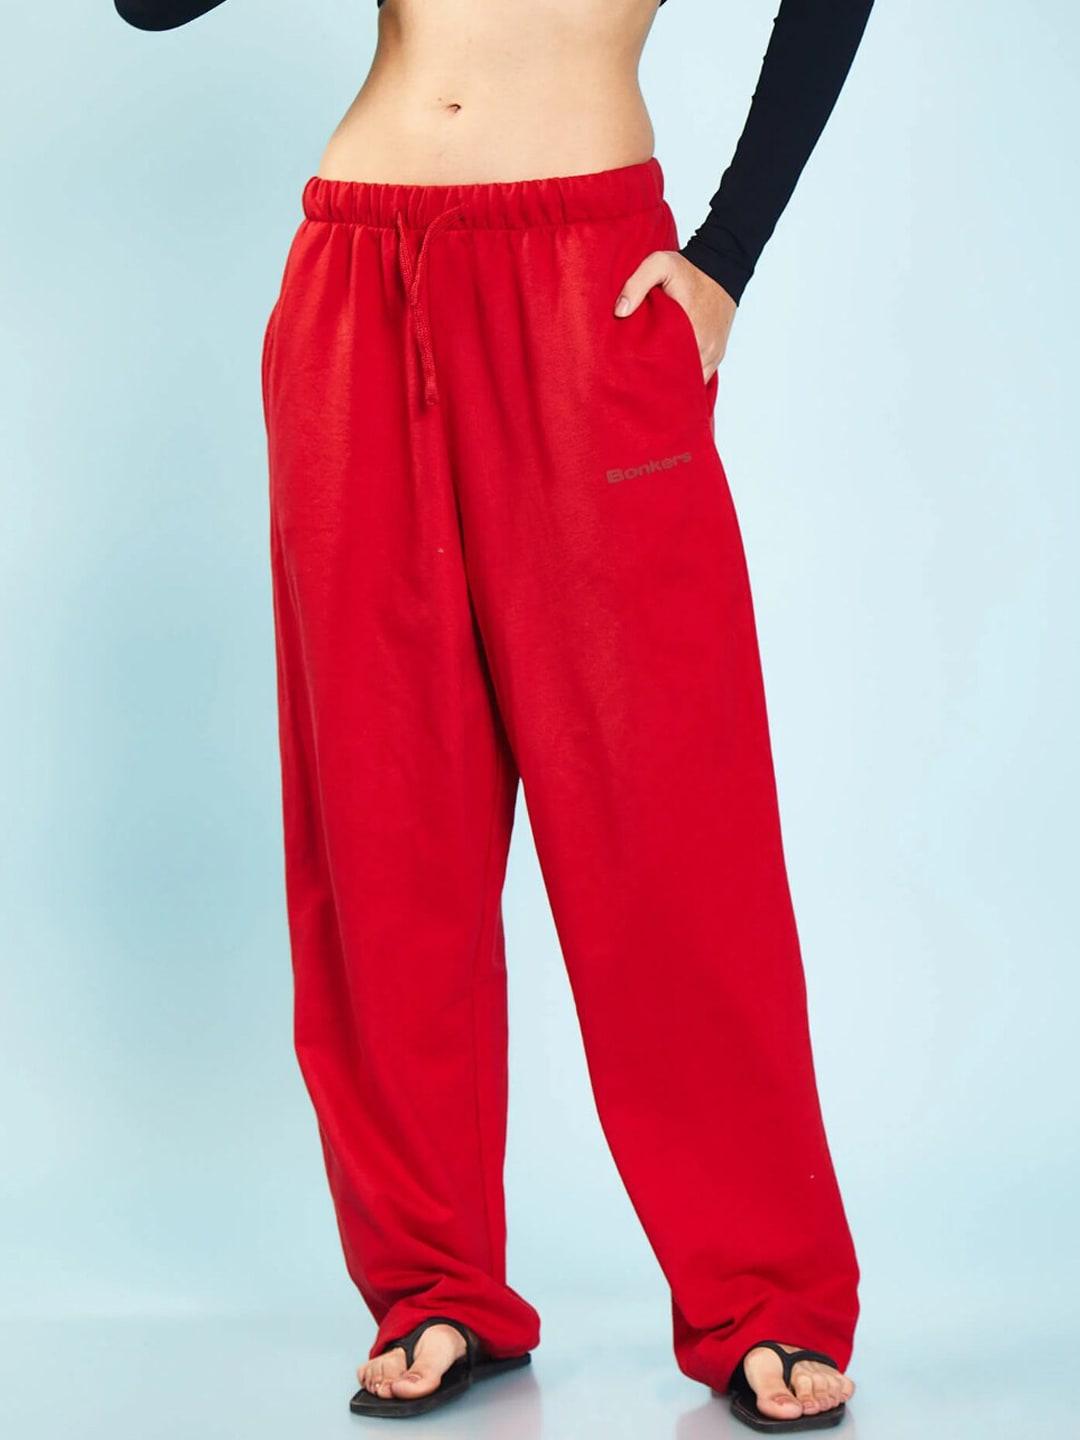 bonkers-corner-women-red-cotton-relaxed-fit-track-pants